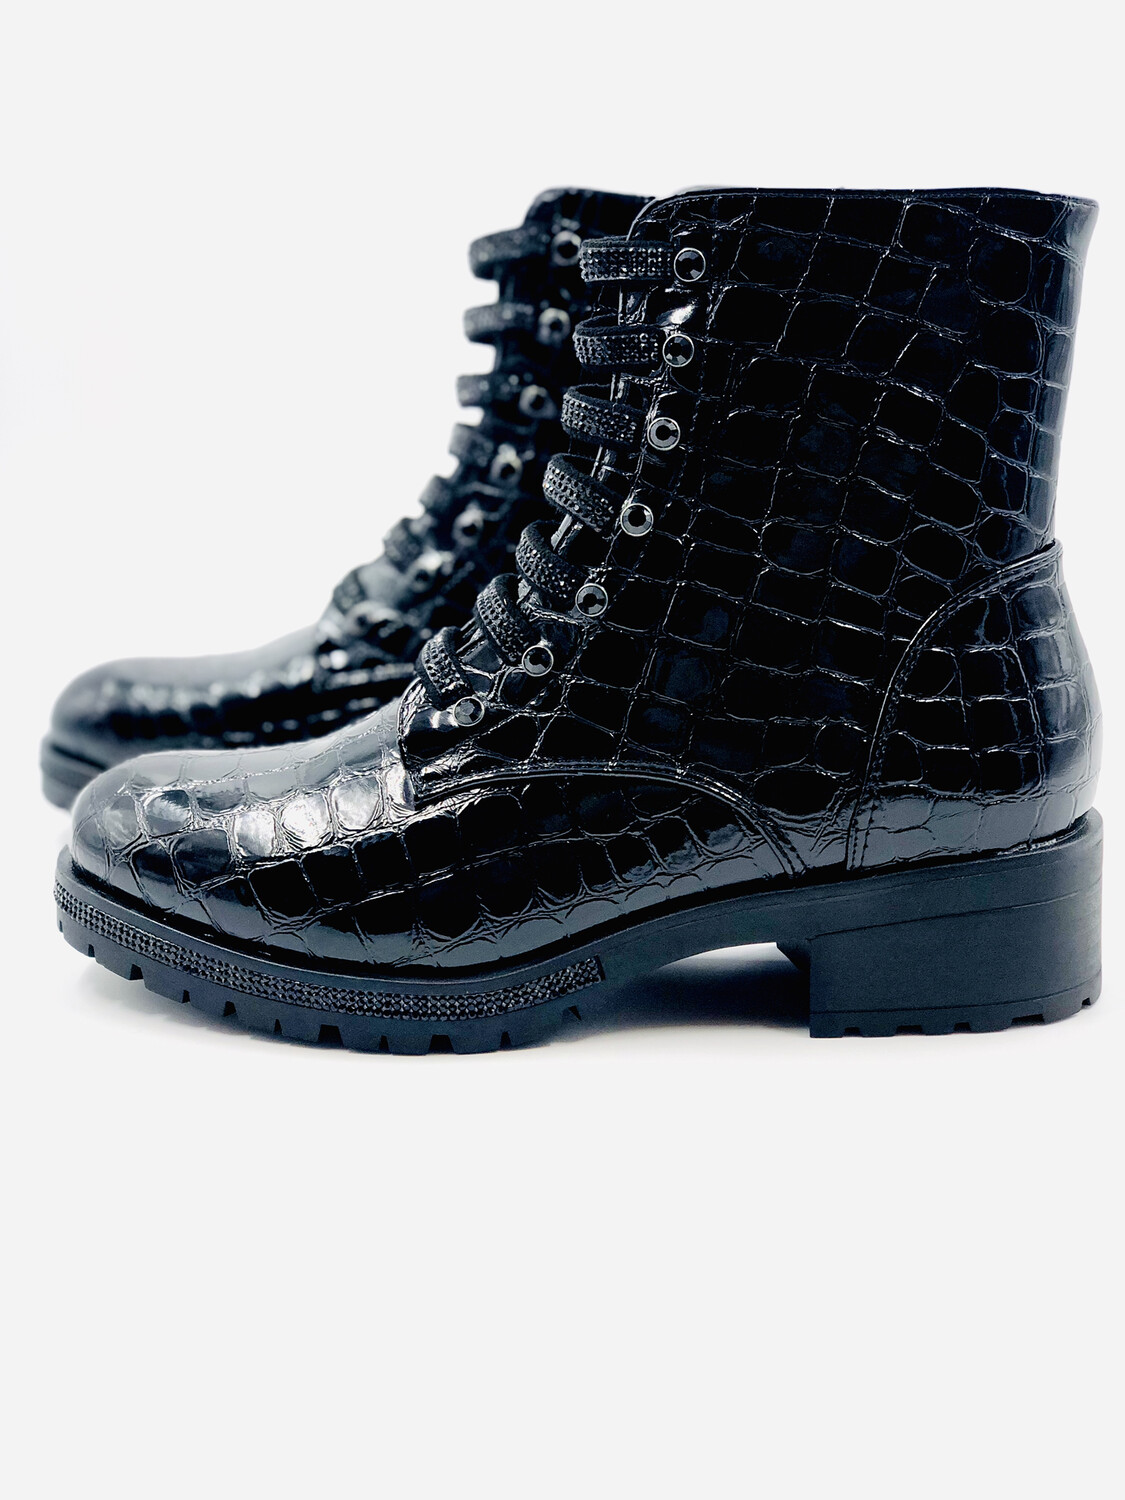 croc boots for sale